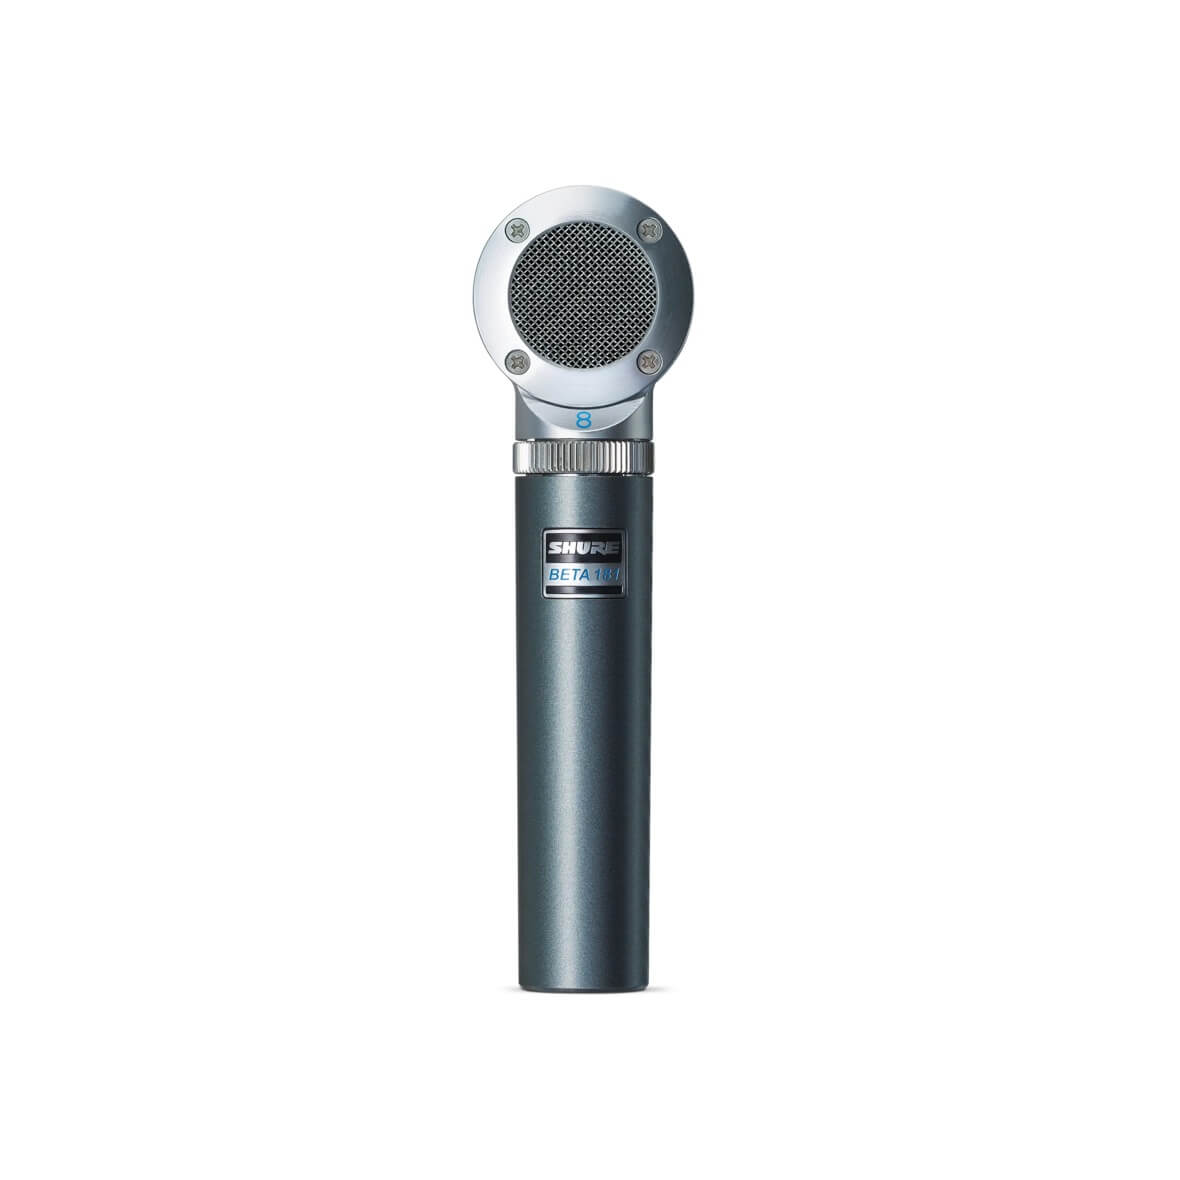 Shure BETA 181 - Ultra-Compact Side-Address Instrument Microphone